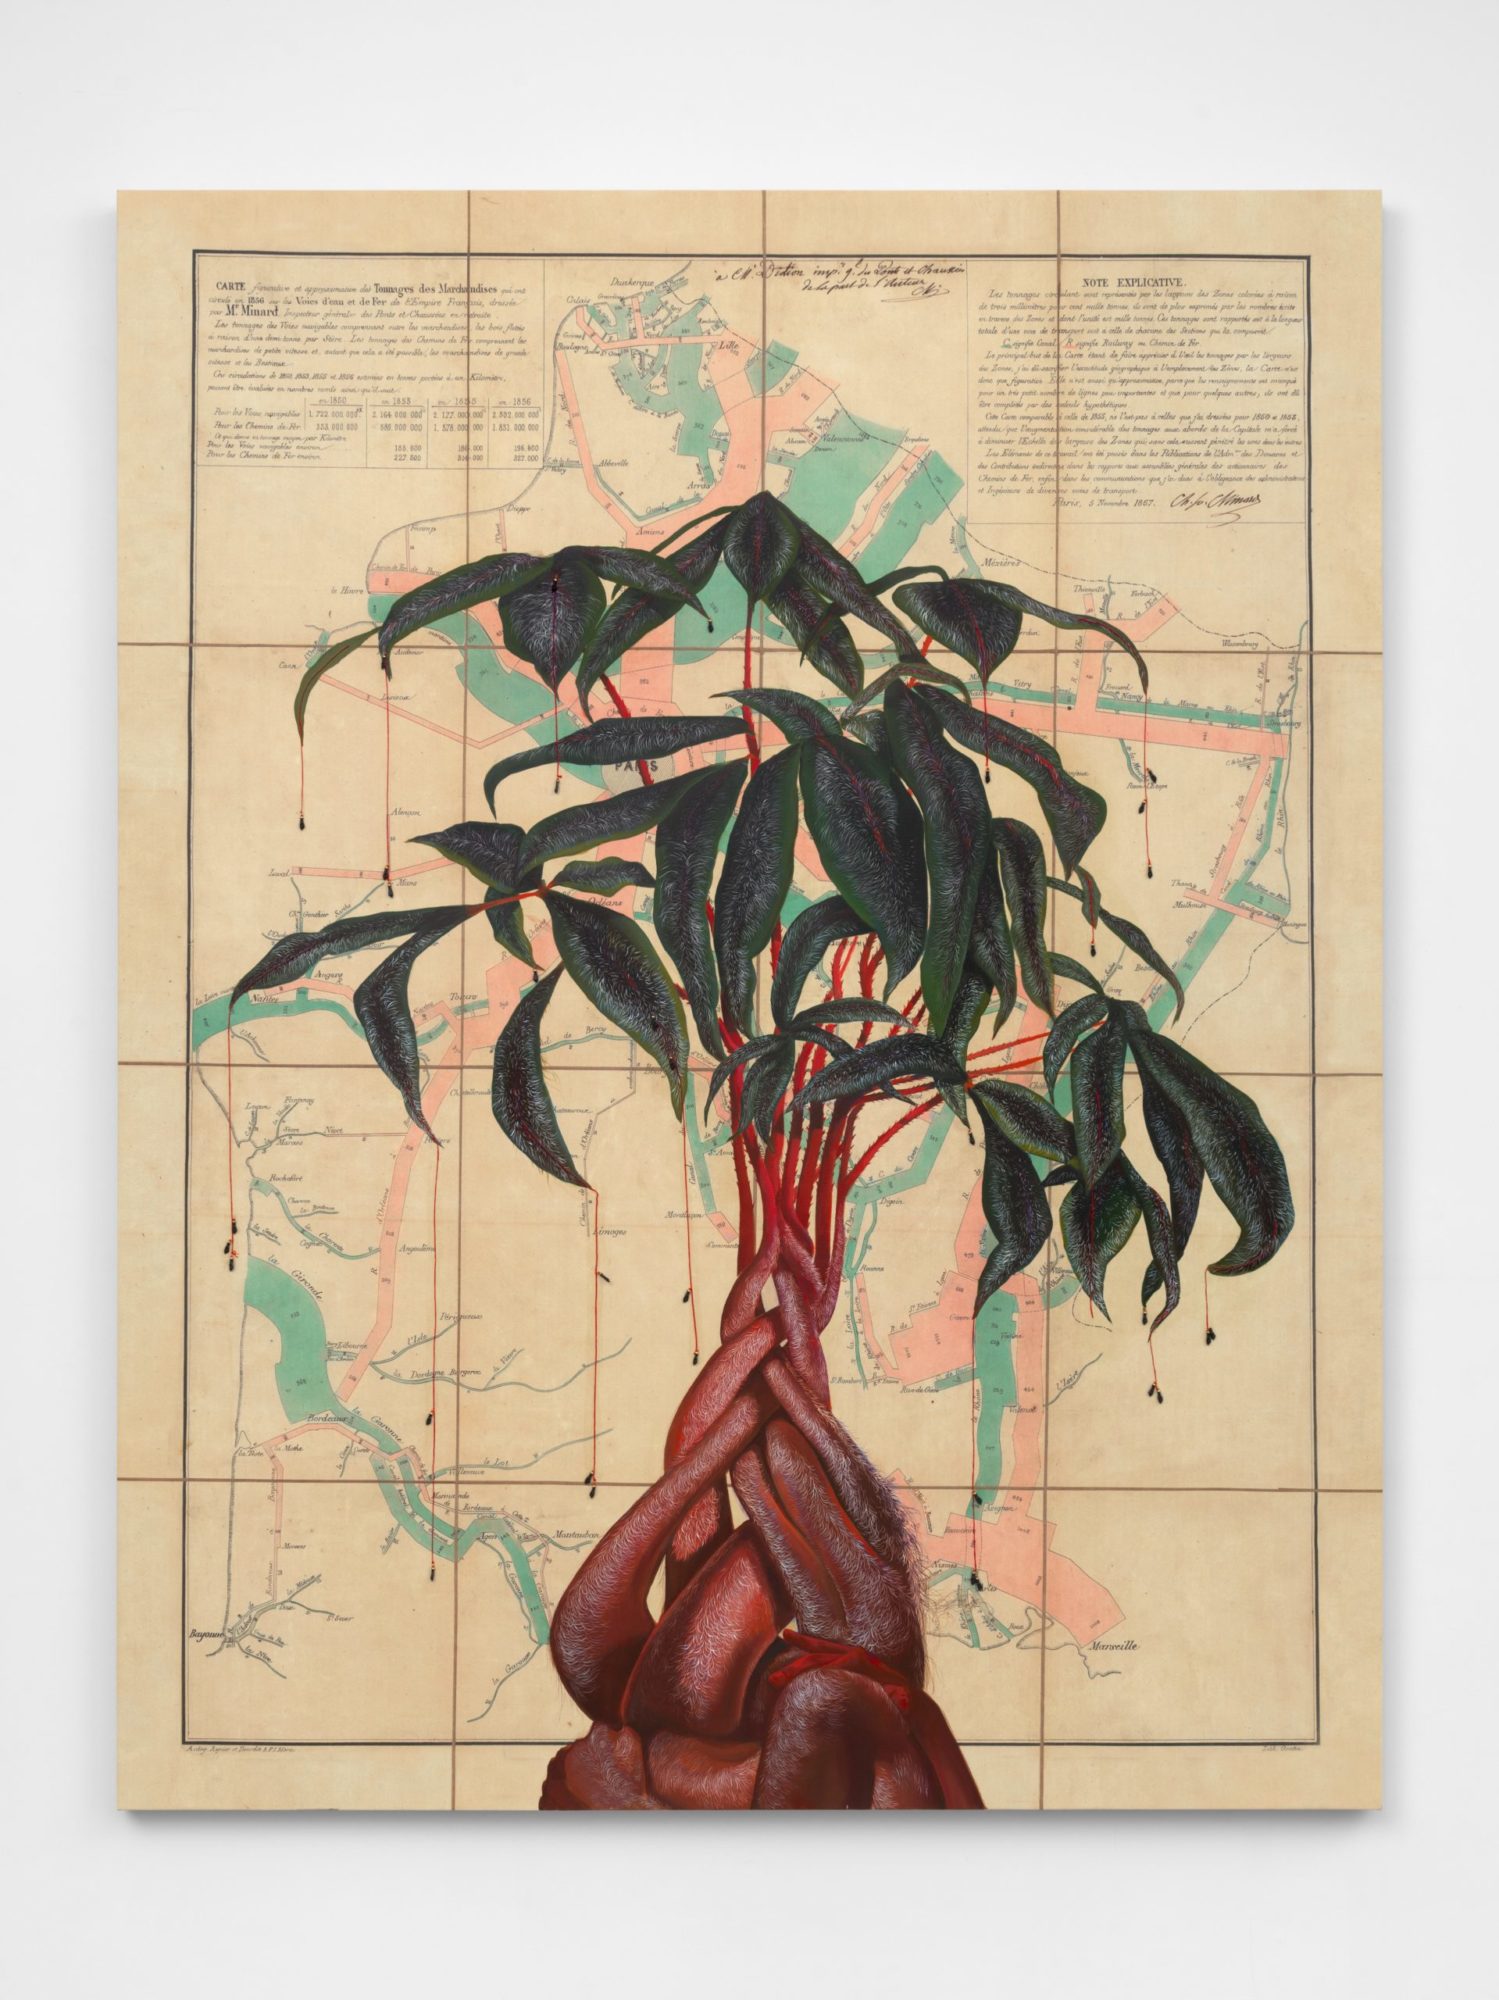 An oil and acrylic painting of green foilage with red interwoven roots which reach the bottom of the canvas. The painting is atop a printed map of French railways and waterways in 1856.